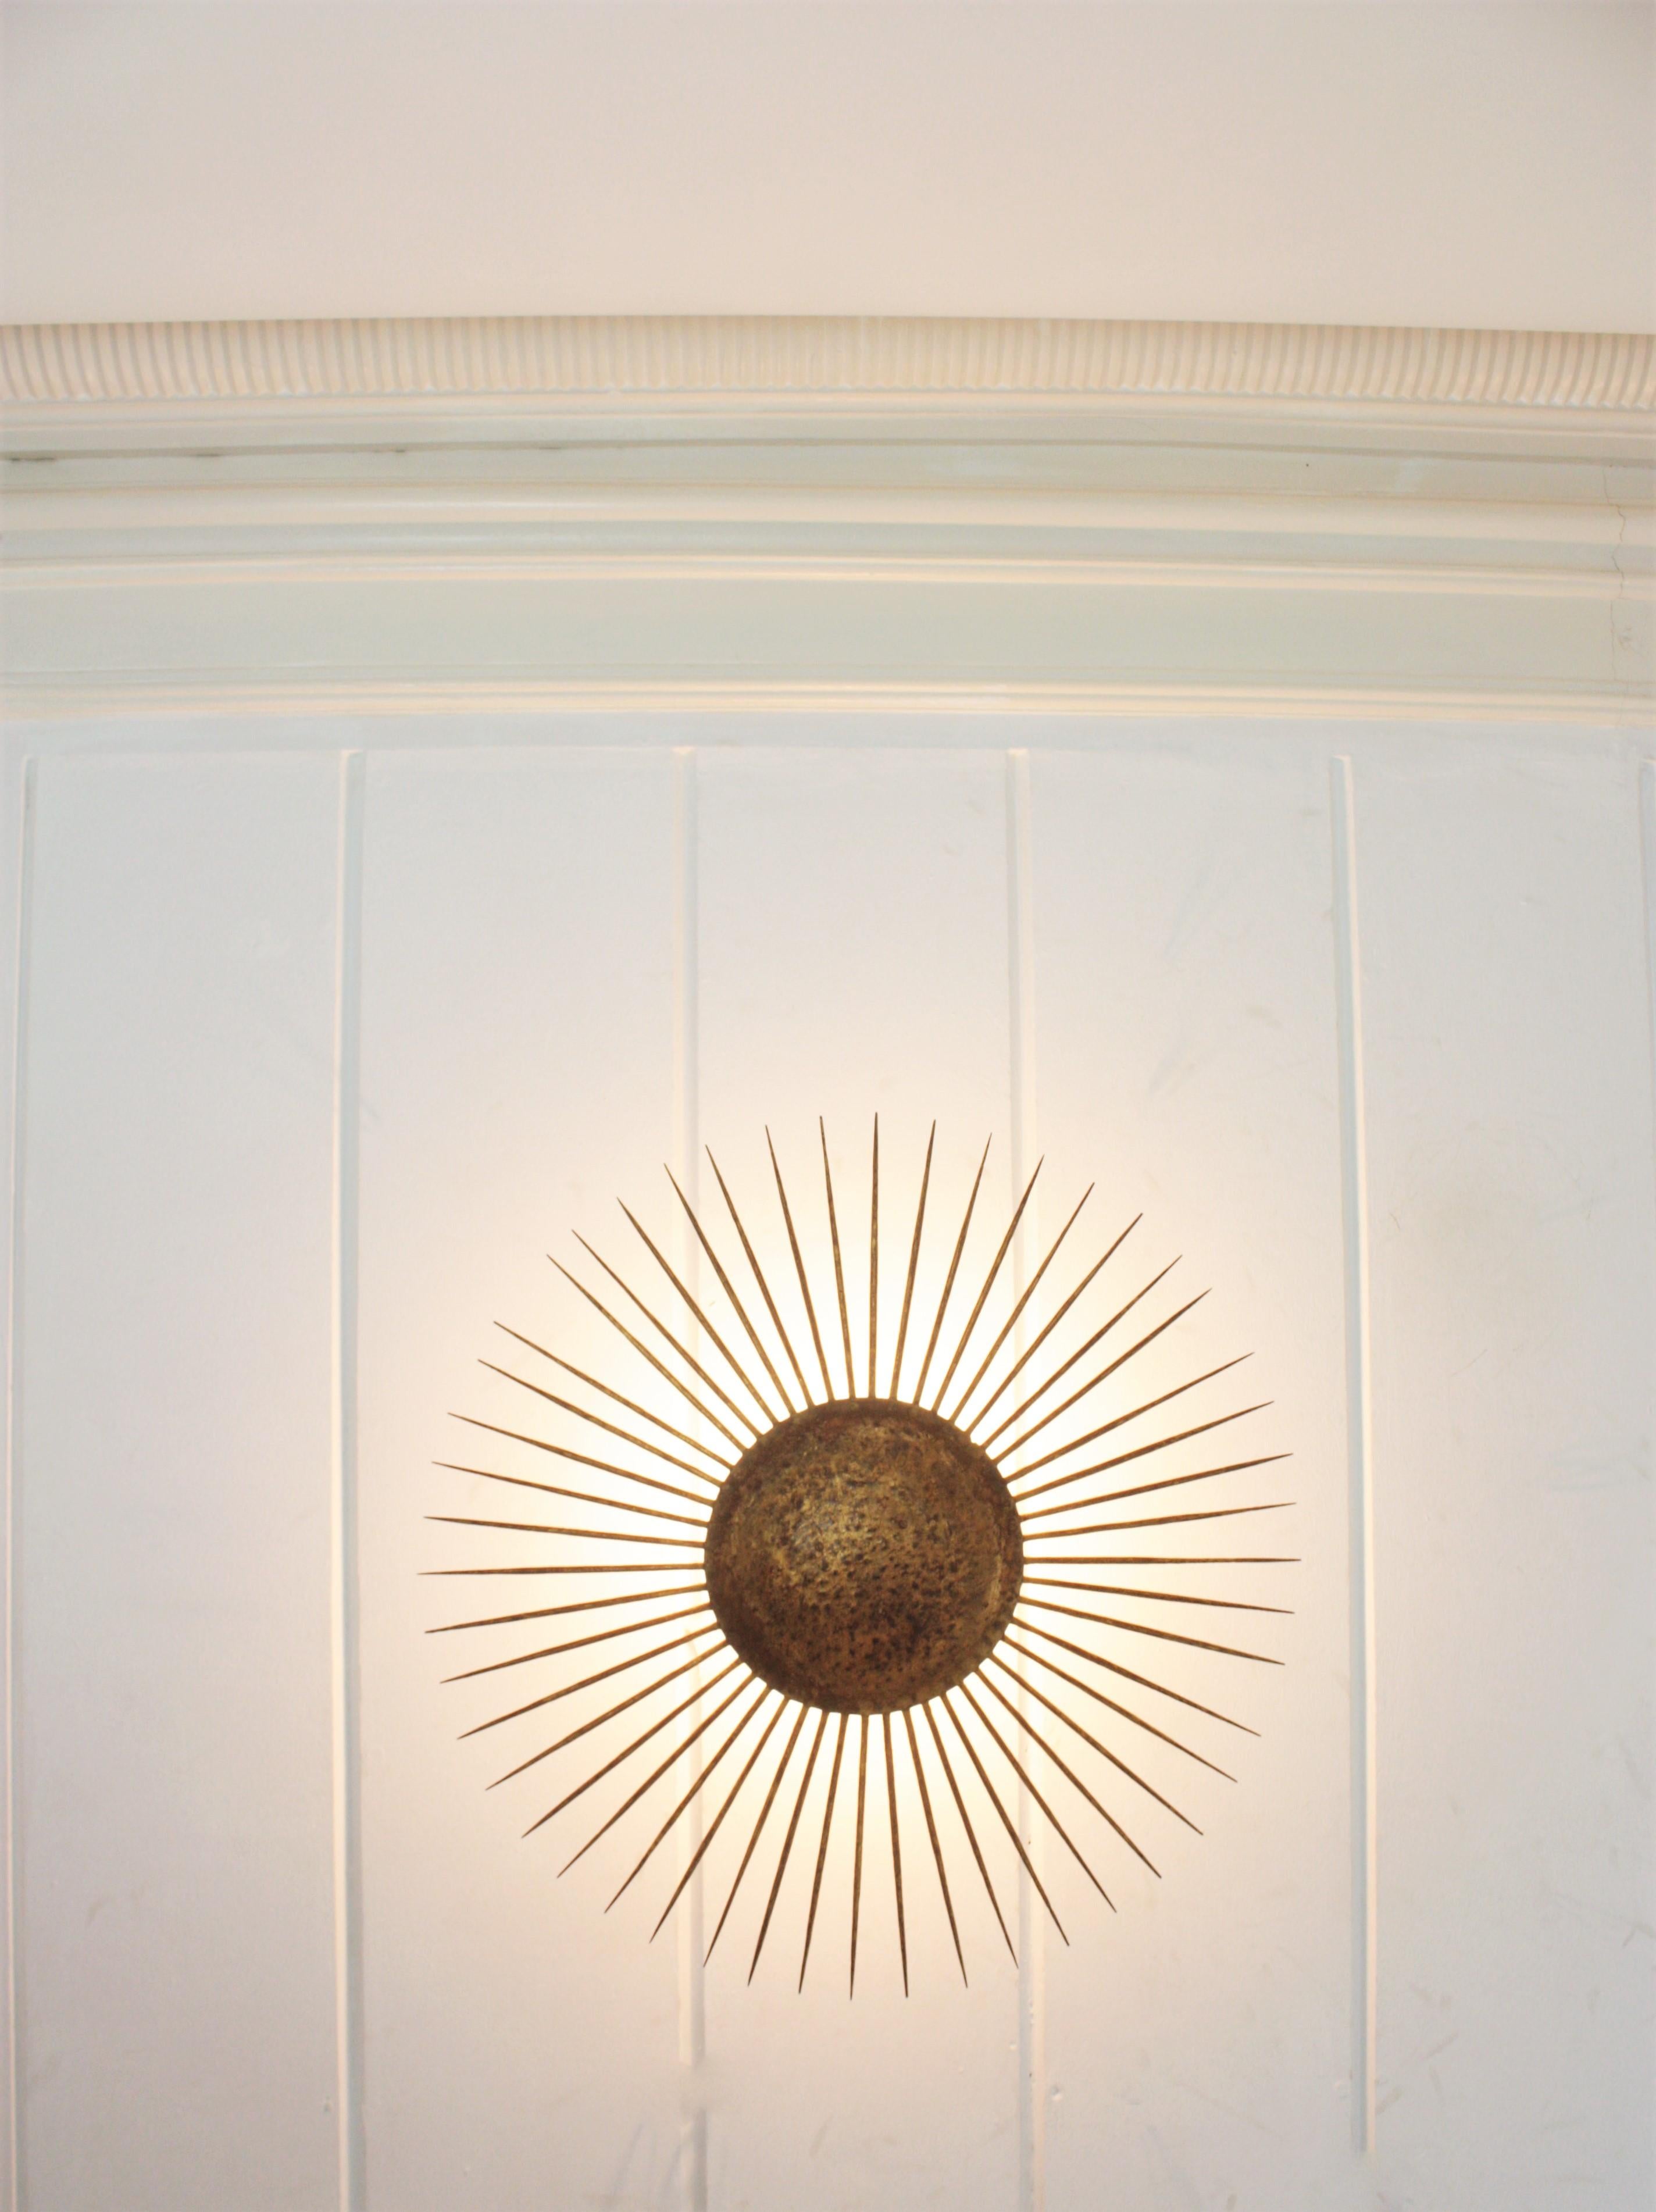 French Sunburst Ceiling Light Fixture in Gilt Wrought Iron, 1940s For Sale 11